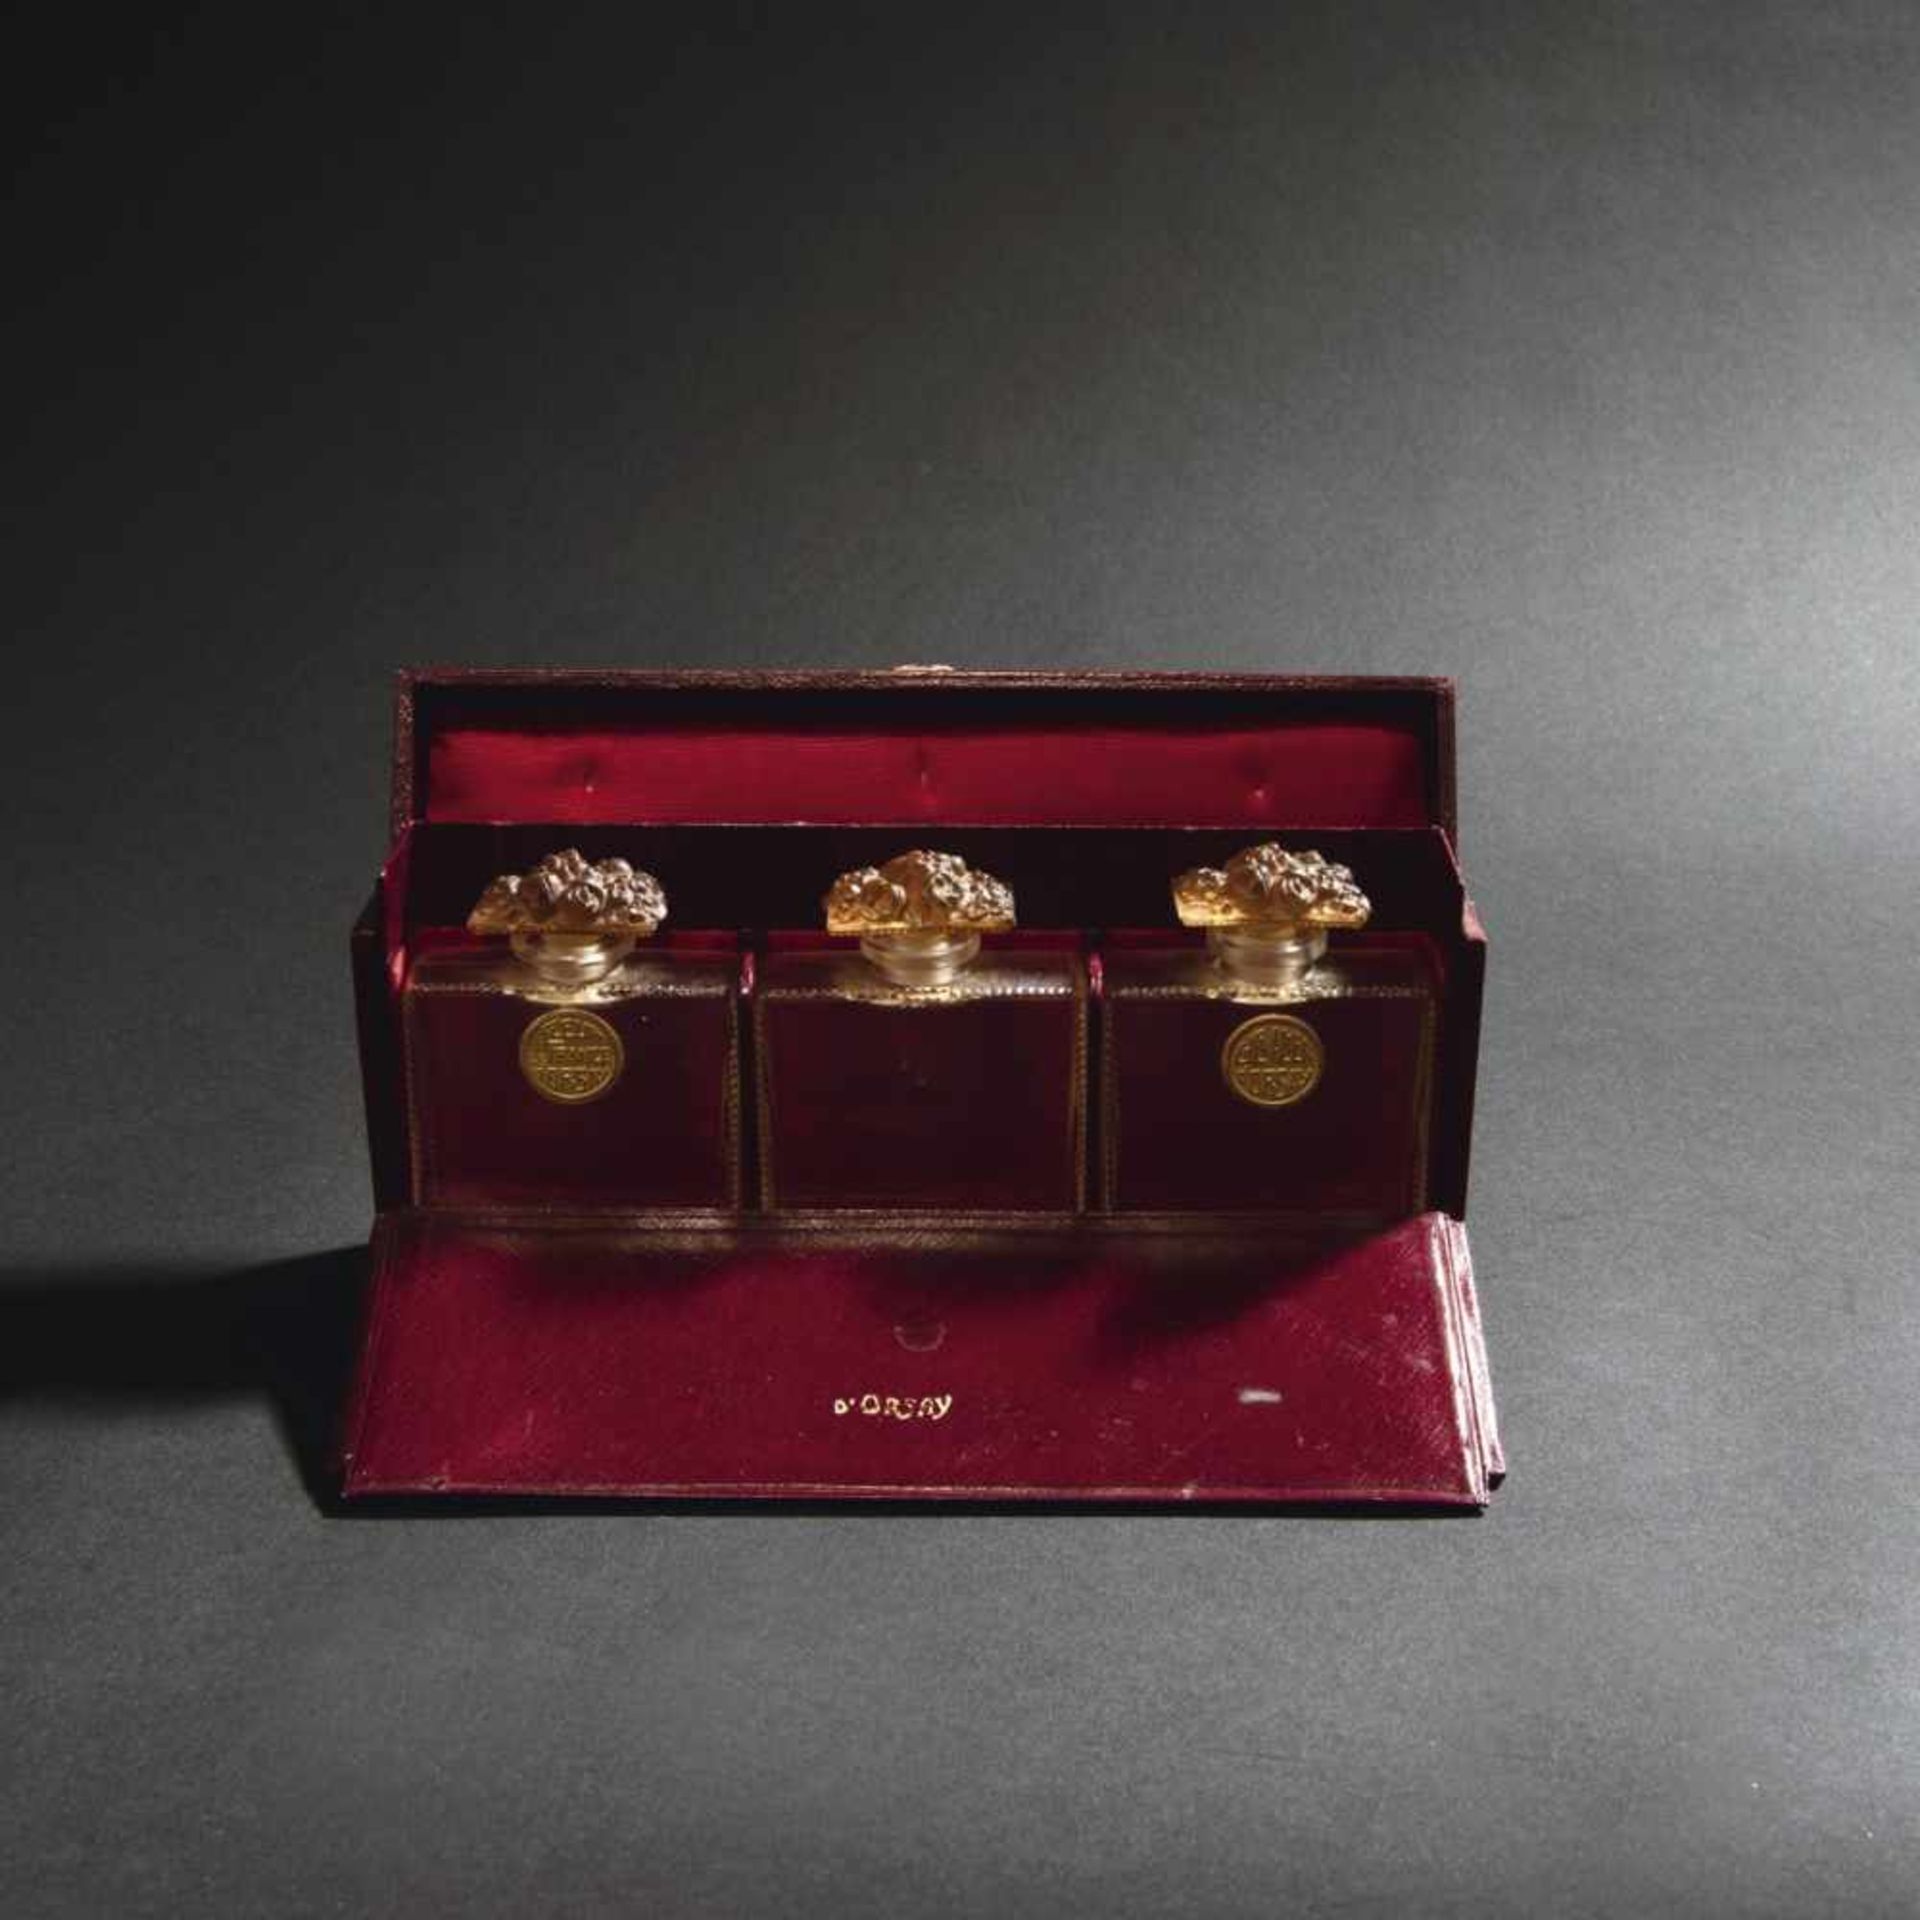 René Lalique, Three flacons for D'Orsay in original box, 1919Three flacons for D'Orsay in original